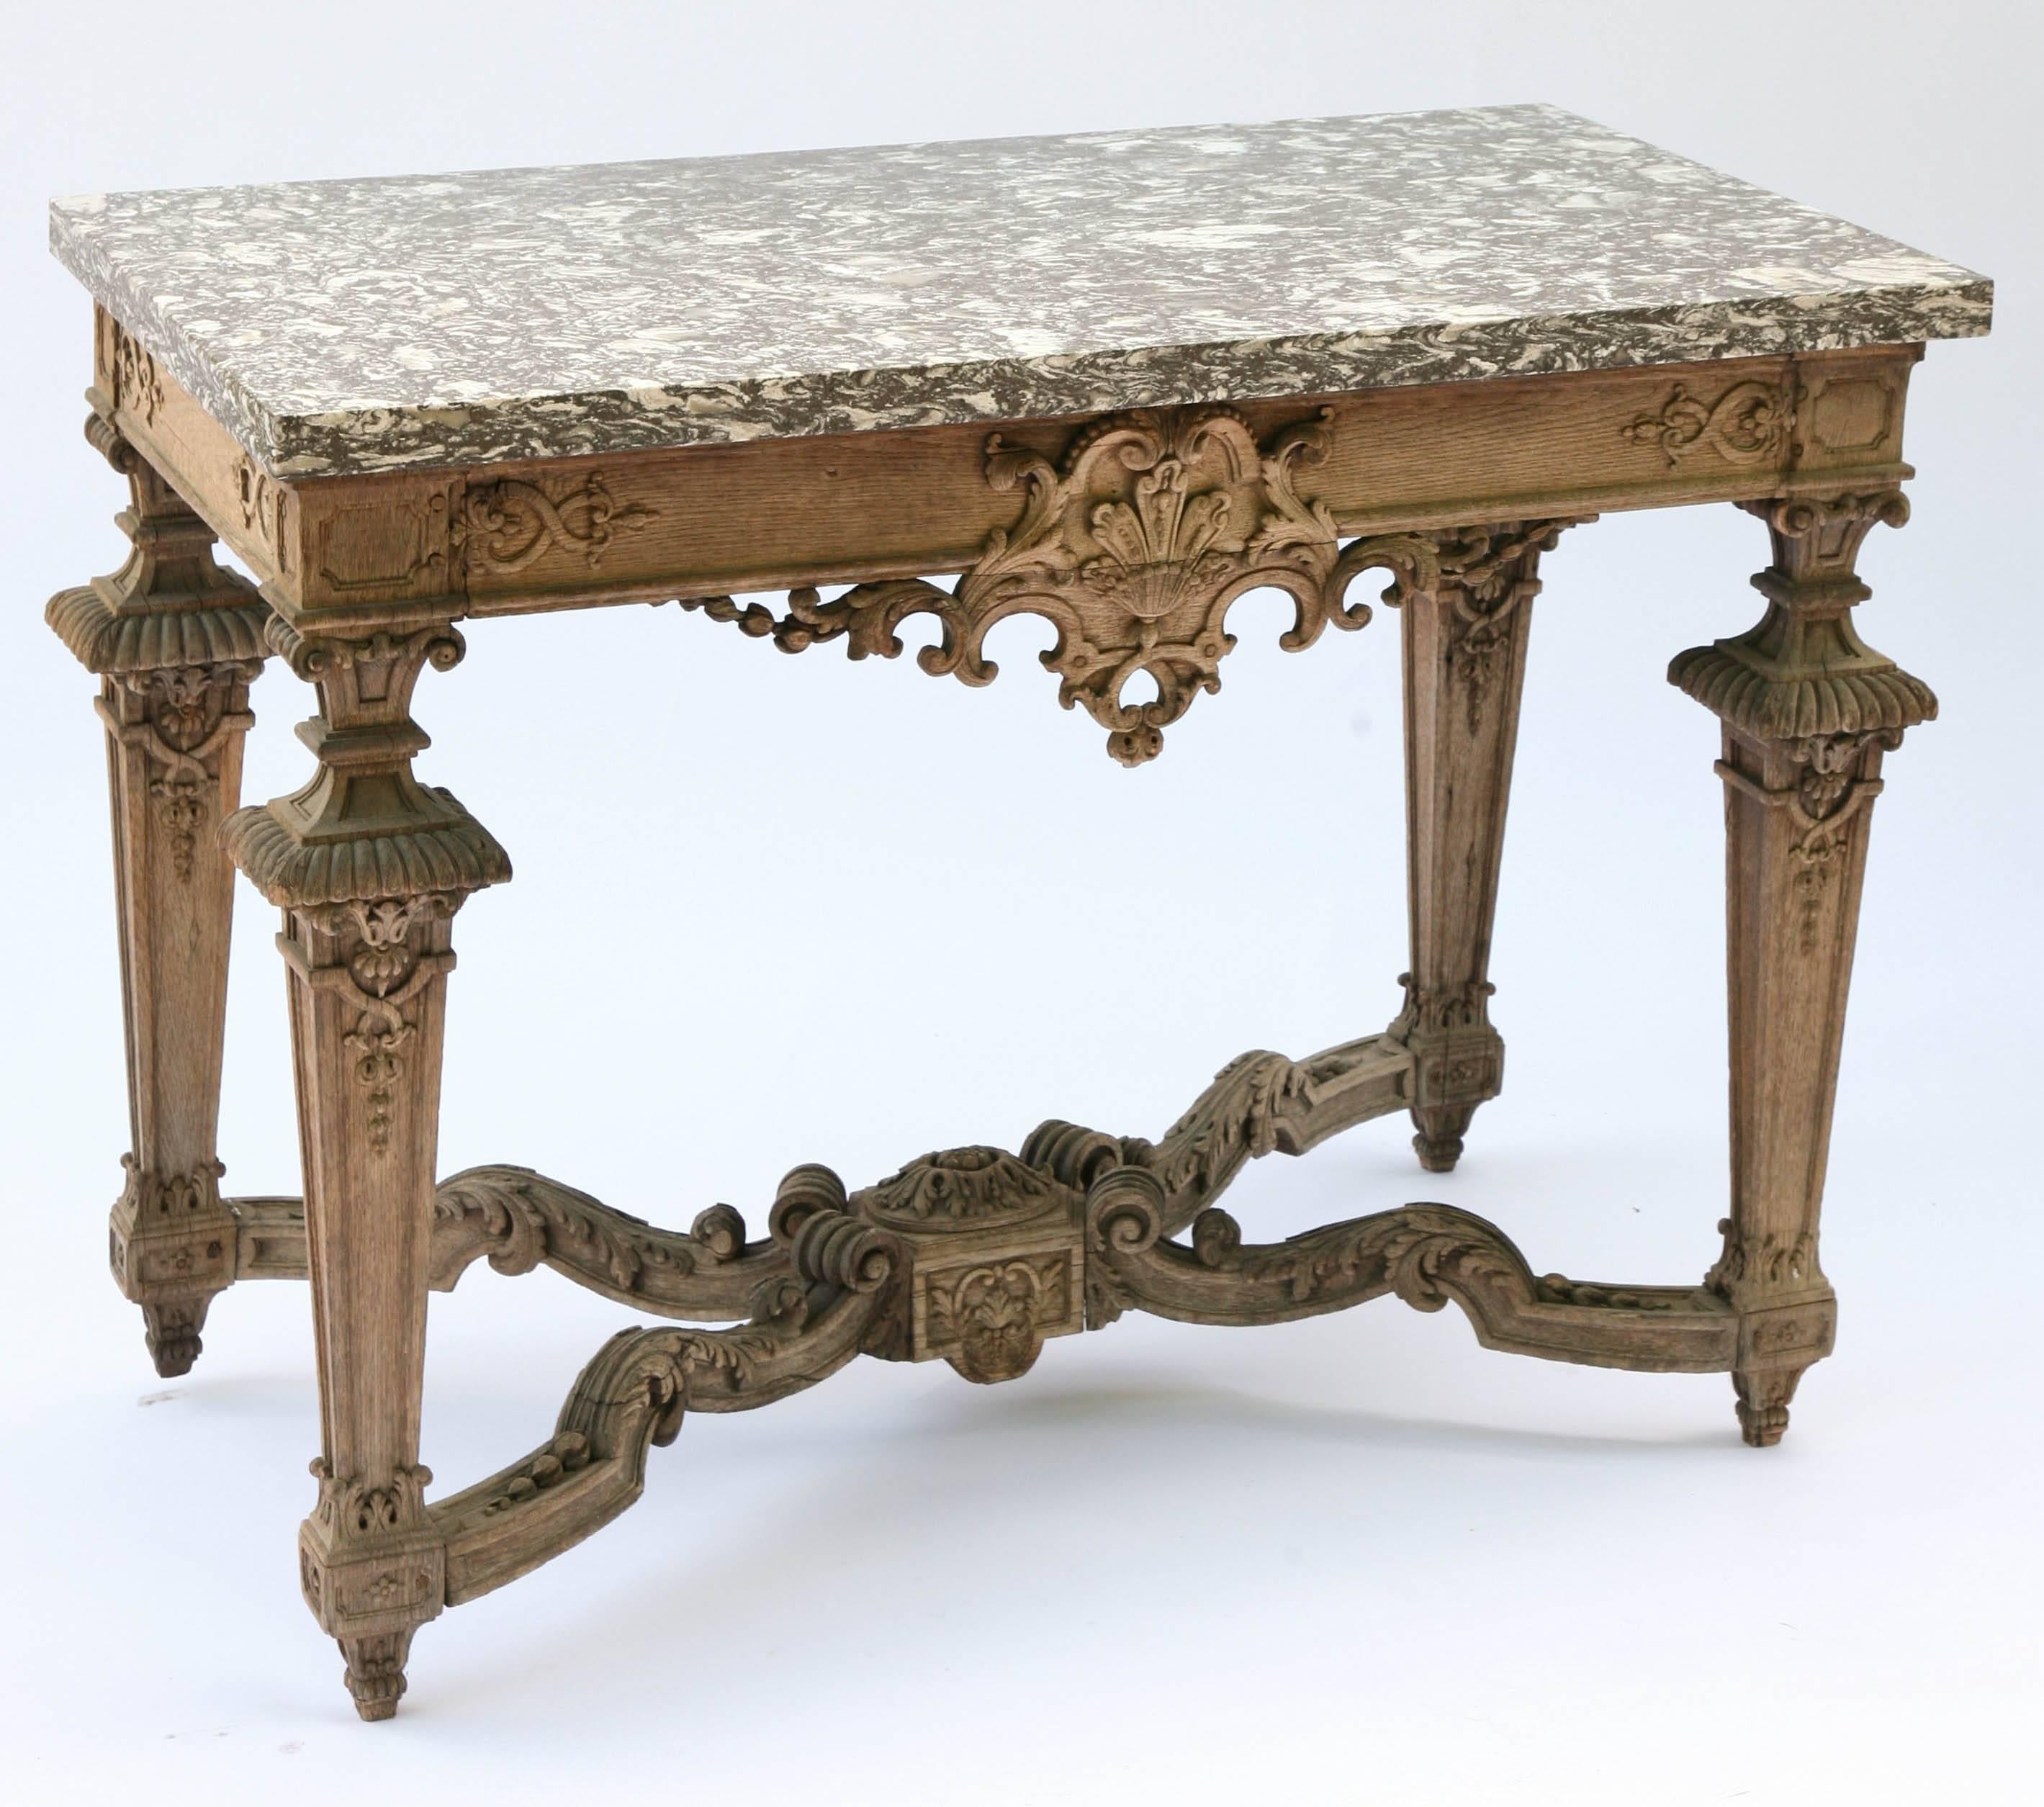 Console table, having a rectangular top of black marble, on elaborately carved bleached oak base, its apron outcarved and draped with scrolling flourishes, raised on square tapering legs connected by X-stretcher.

Stock ID: D6575